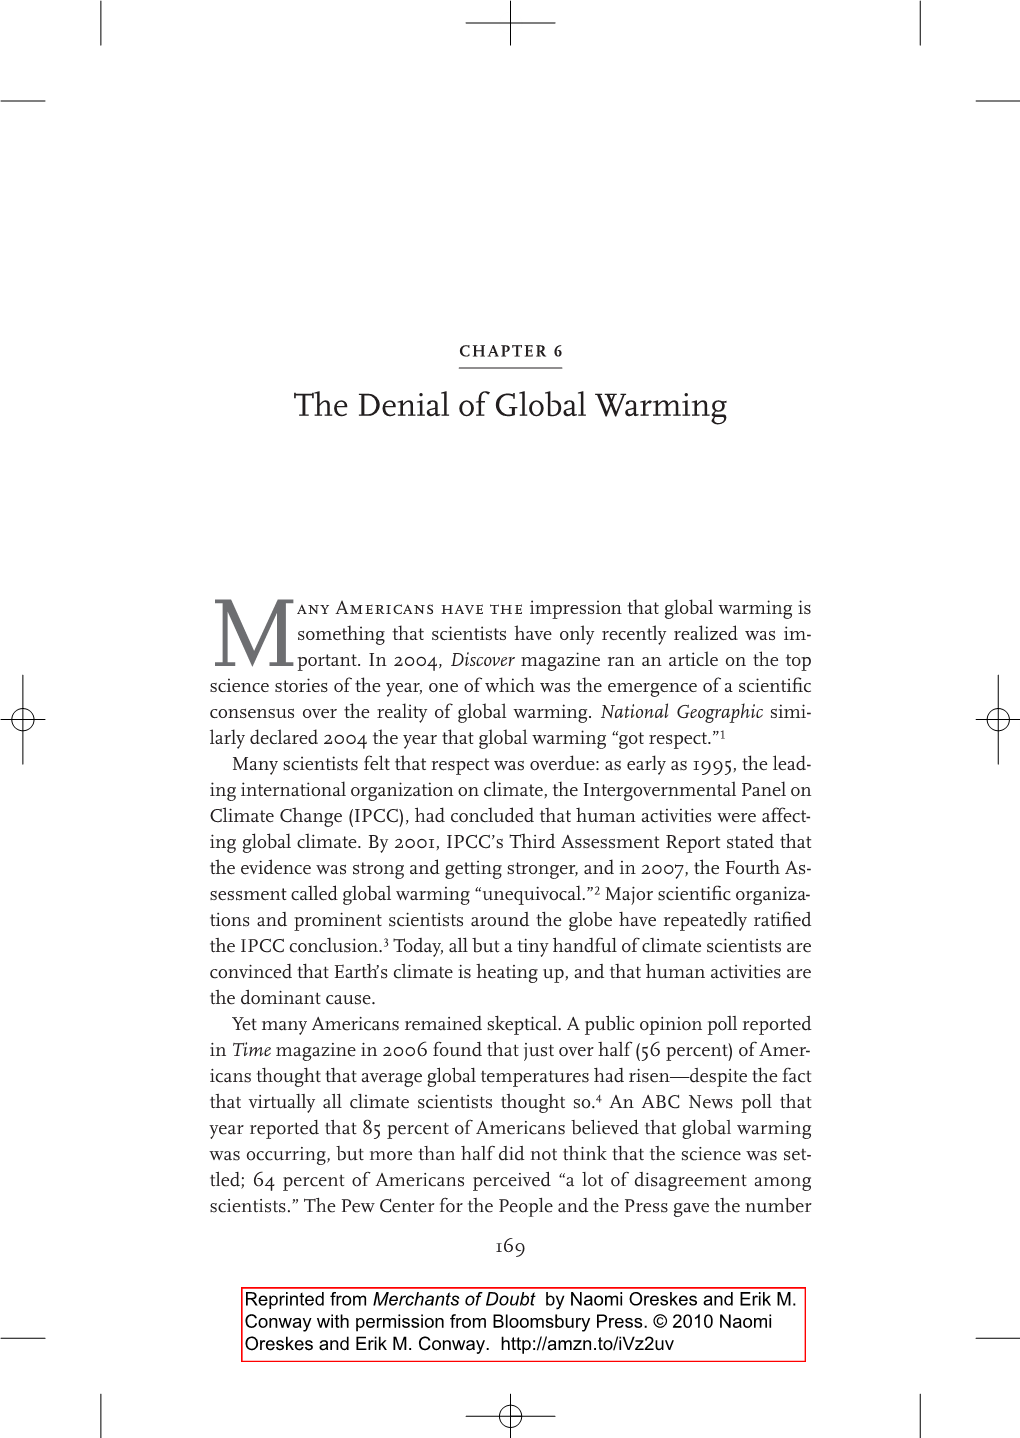 The Denial of Global Warming